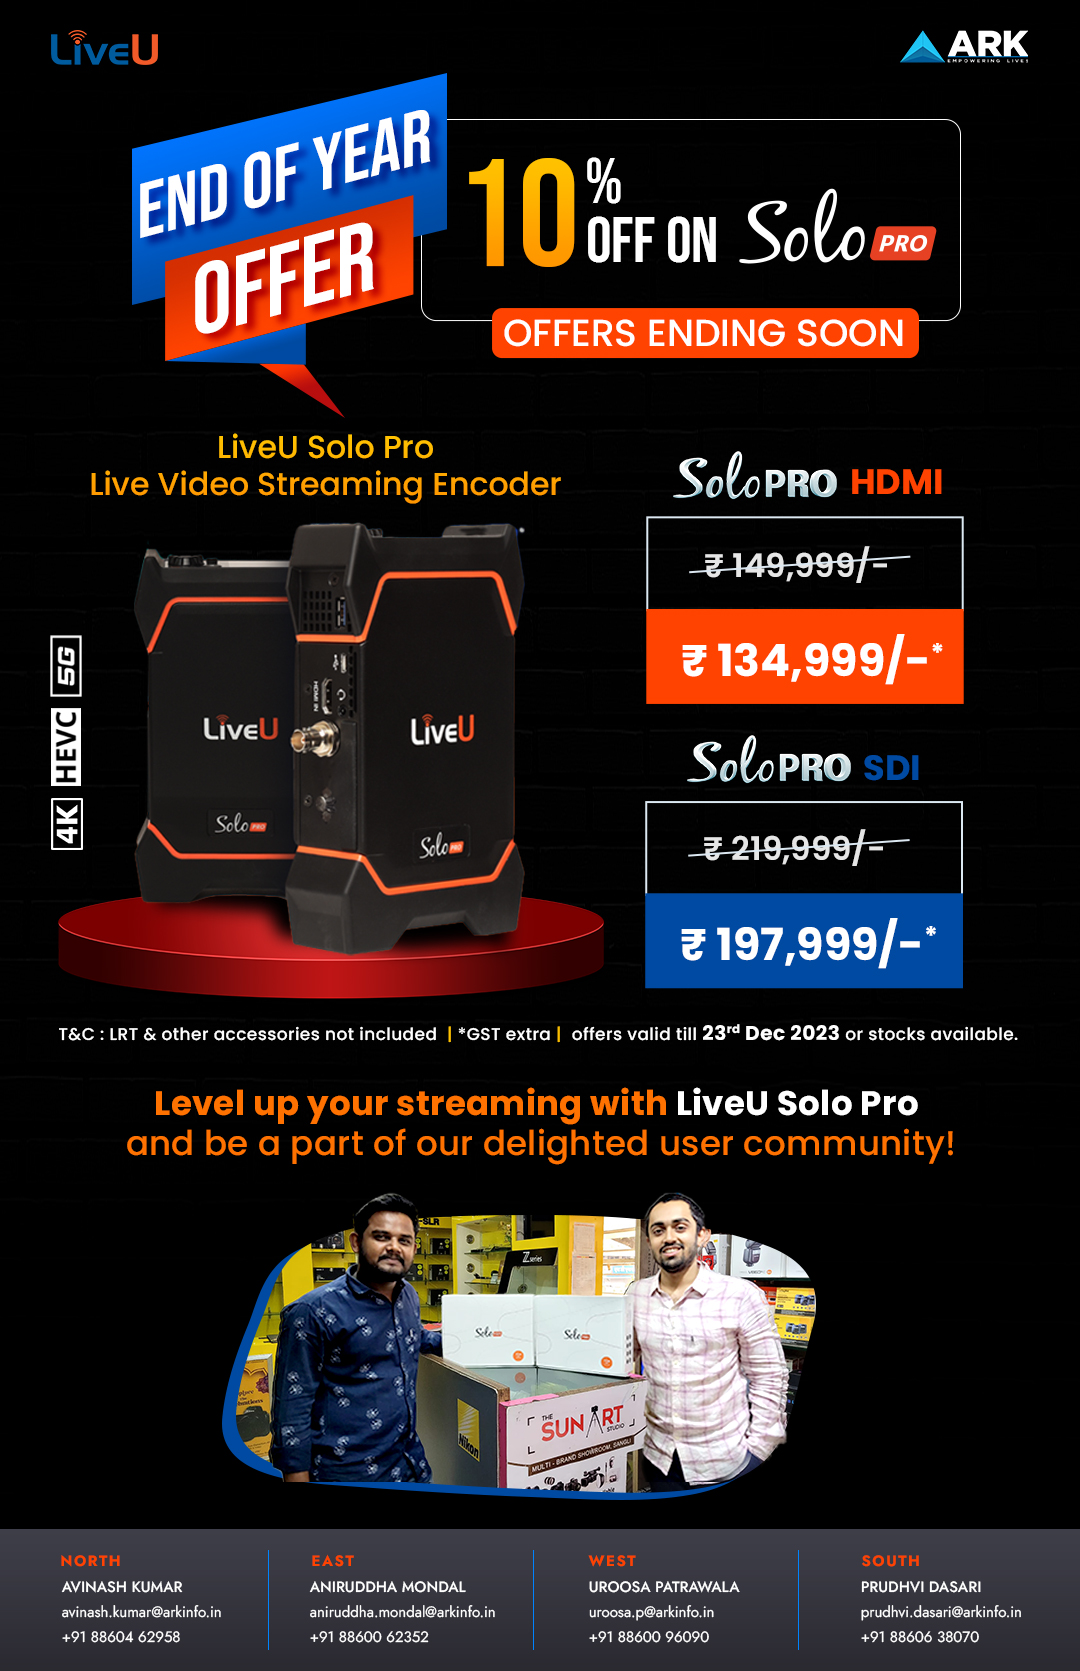 LiveU End of Year Offer